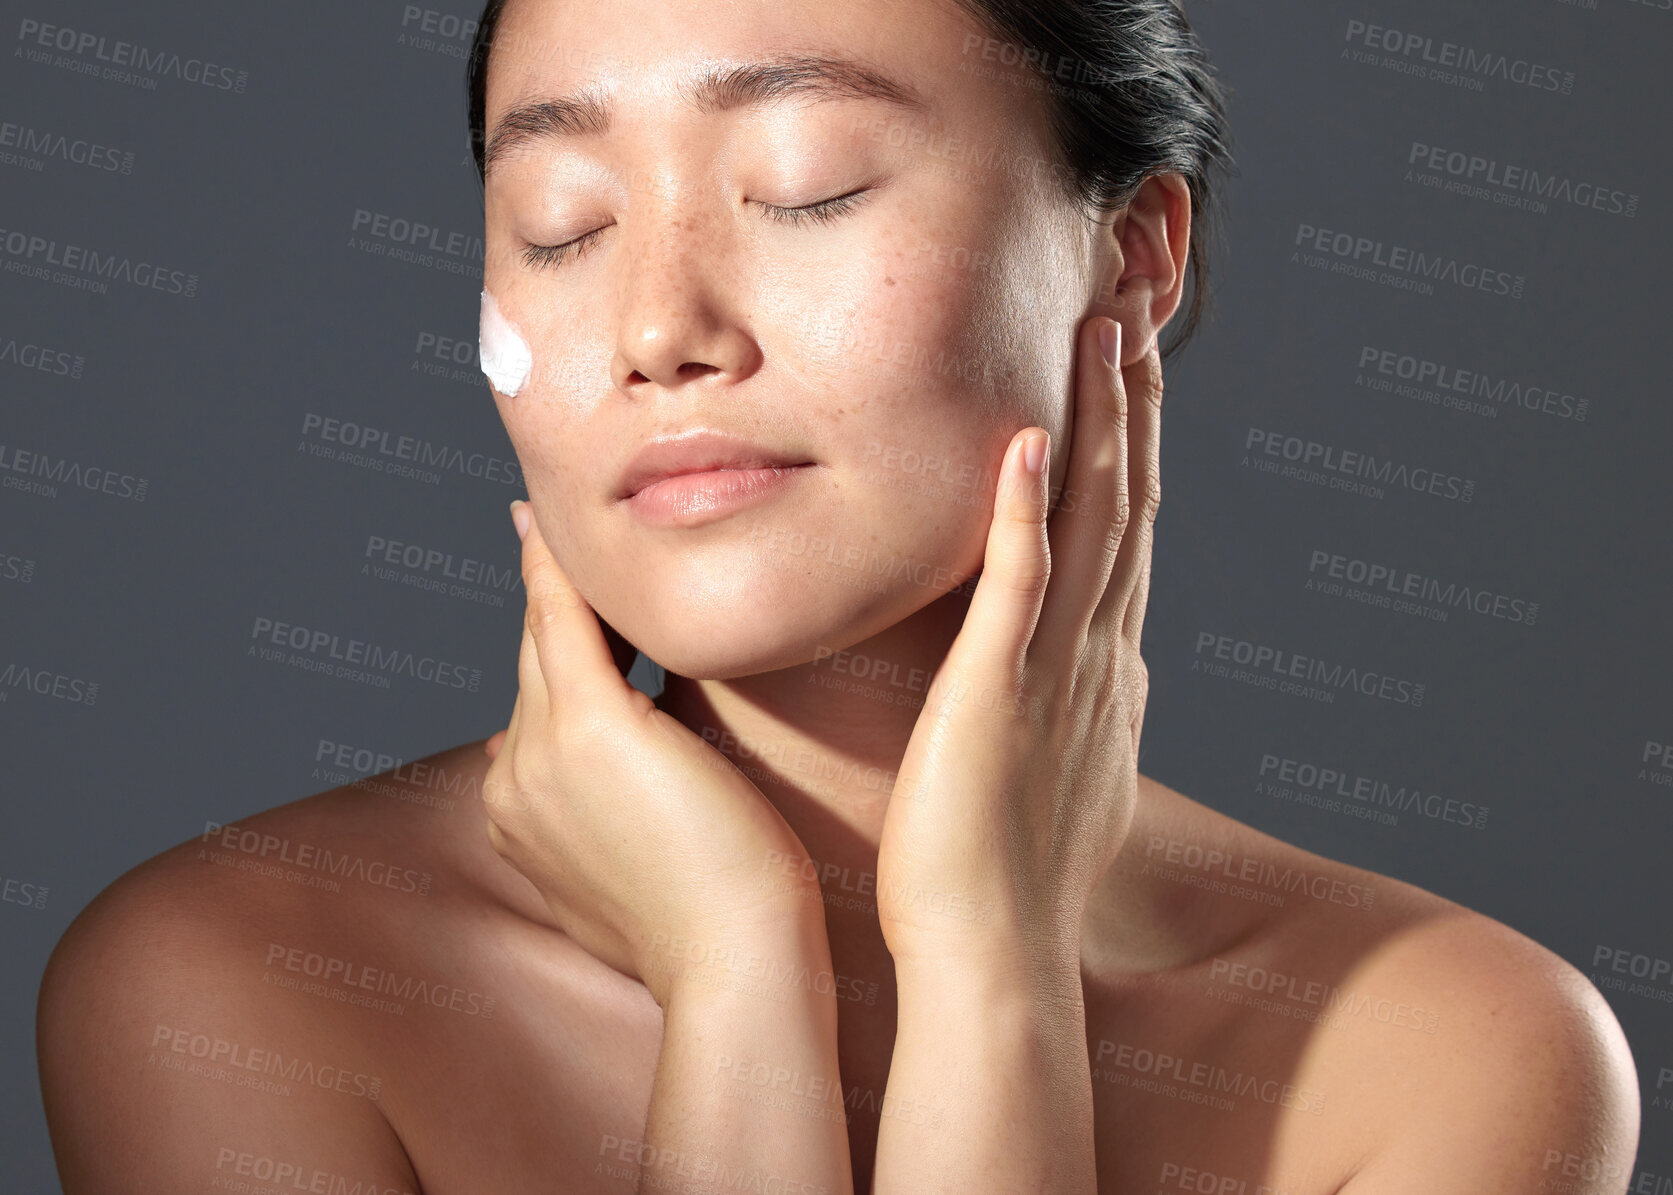 Buy stock photo Studio shot of a beautiful young woman posing with moisturiser on her face